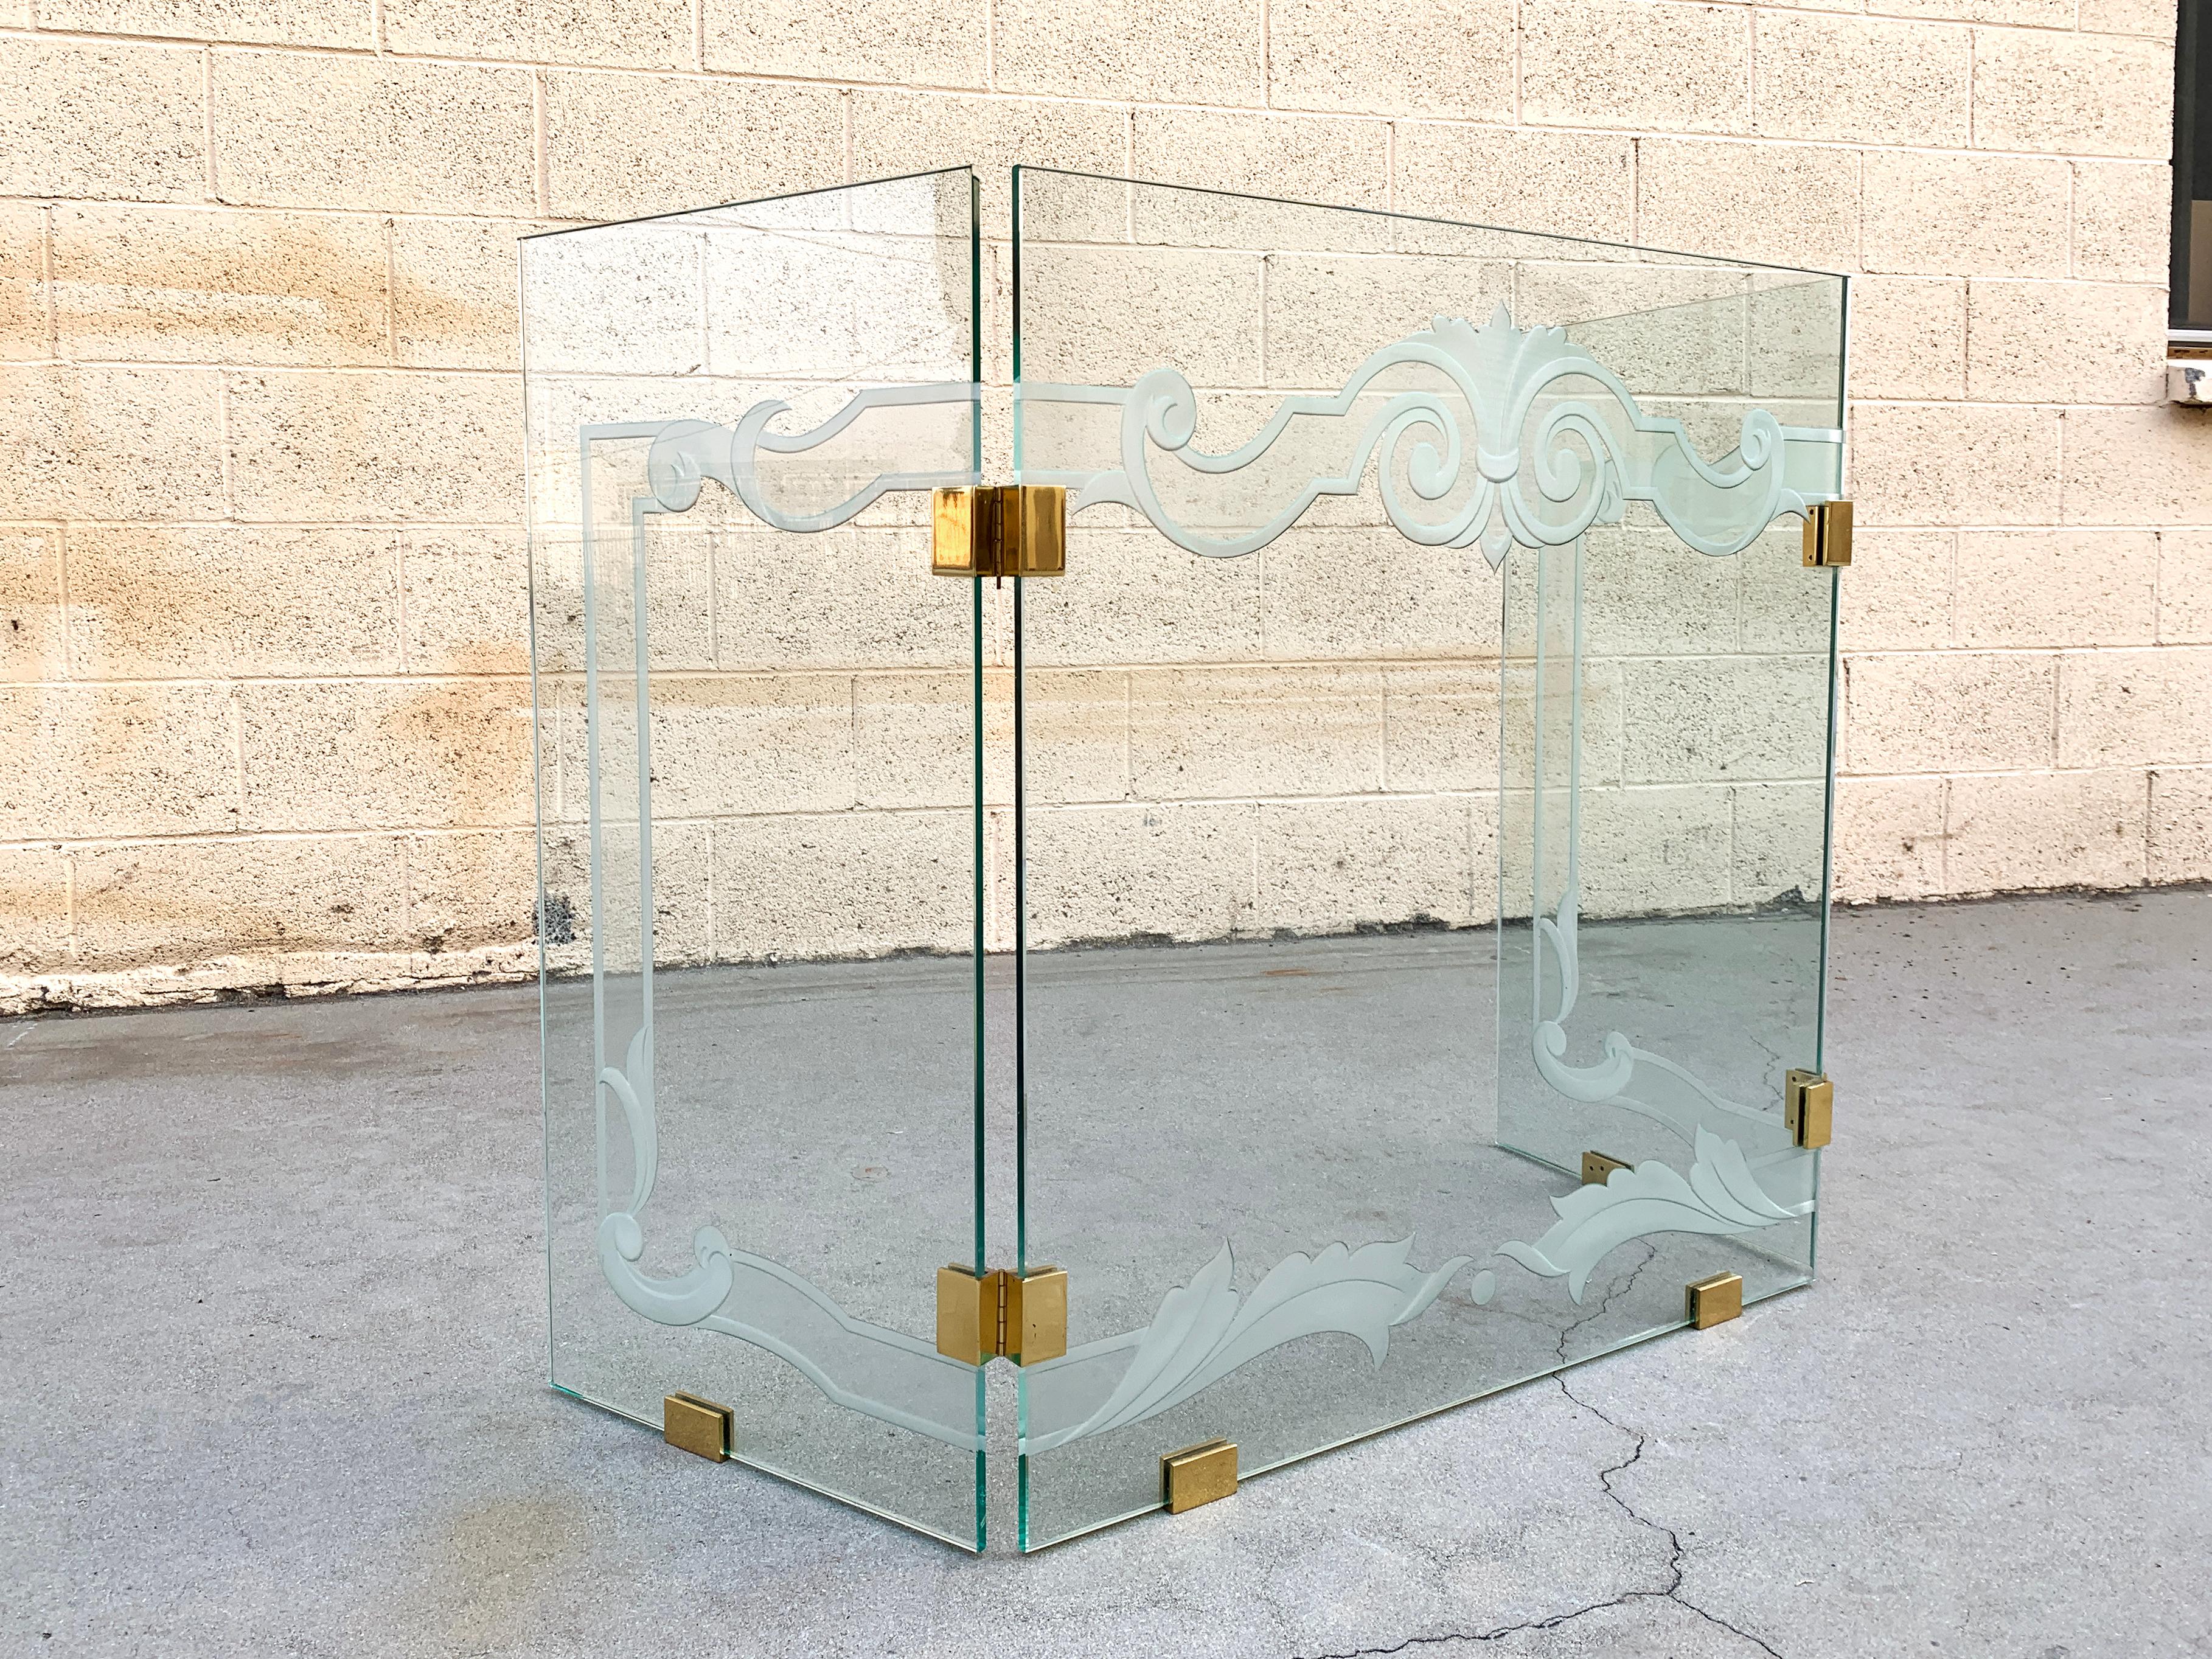 Rare 1980s modern glass fireplace screen with brass hinges by Danny Alessandro. This tri-fold screen features custom glass etching in a ribbon design. Truly one-of-a-kind. Excellent condition. 

Dimensions: 48